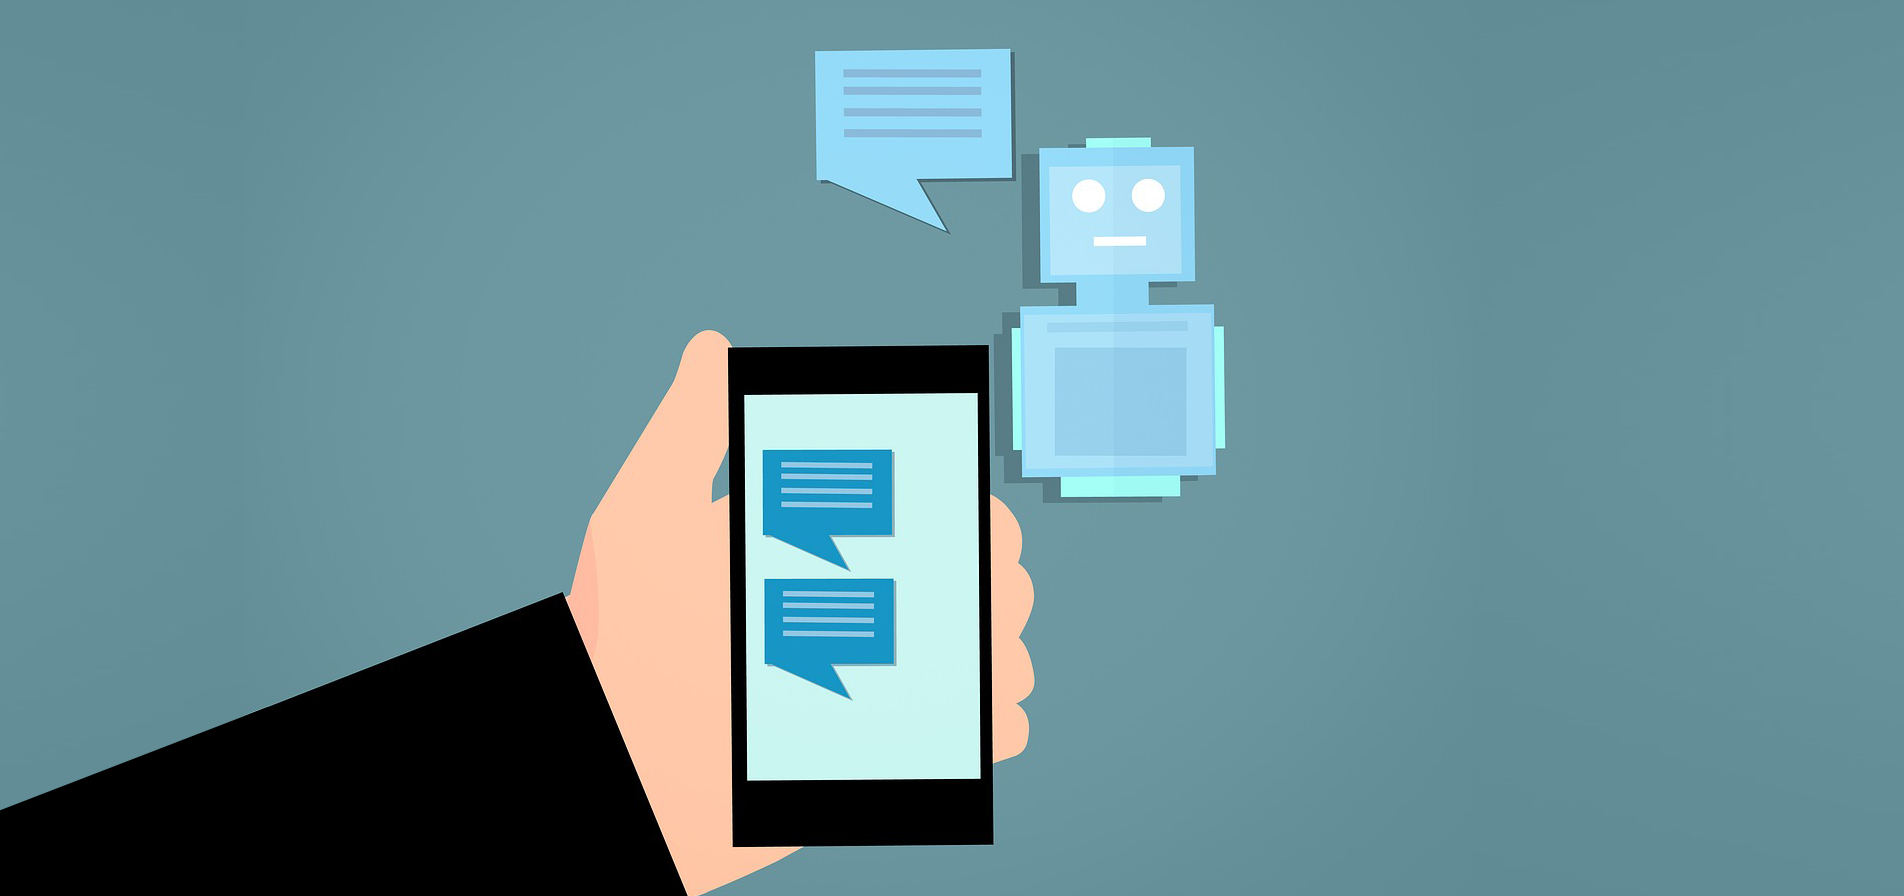 Illustration of a chatbot communicating with a smartphone.